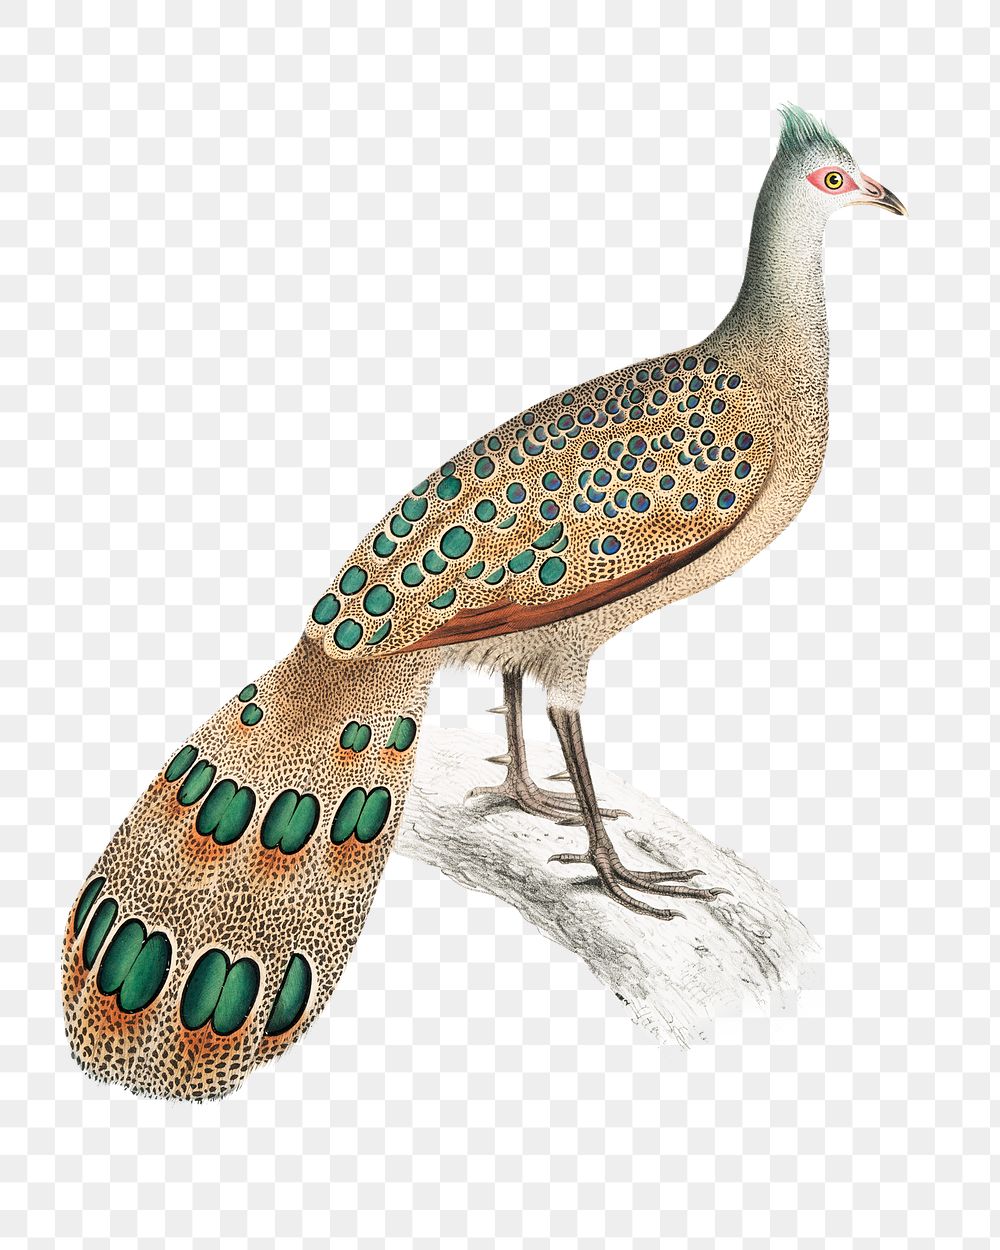 Hardwicke's polyplectron png sticker, vintage bird on transparent background